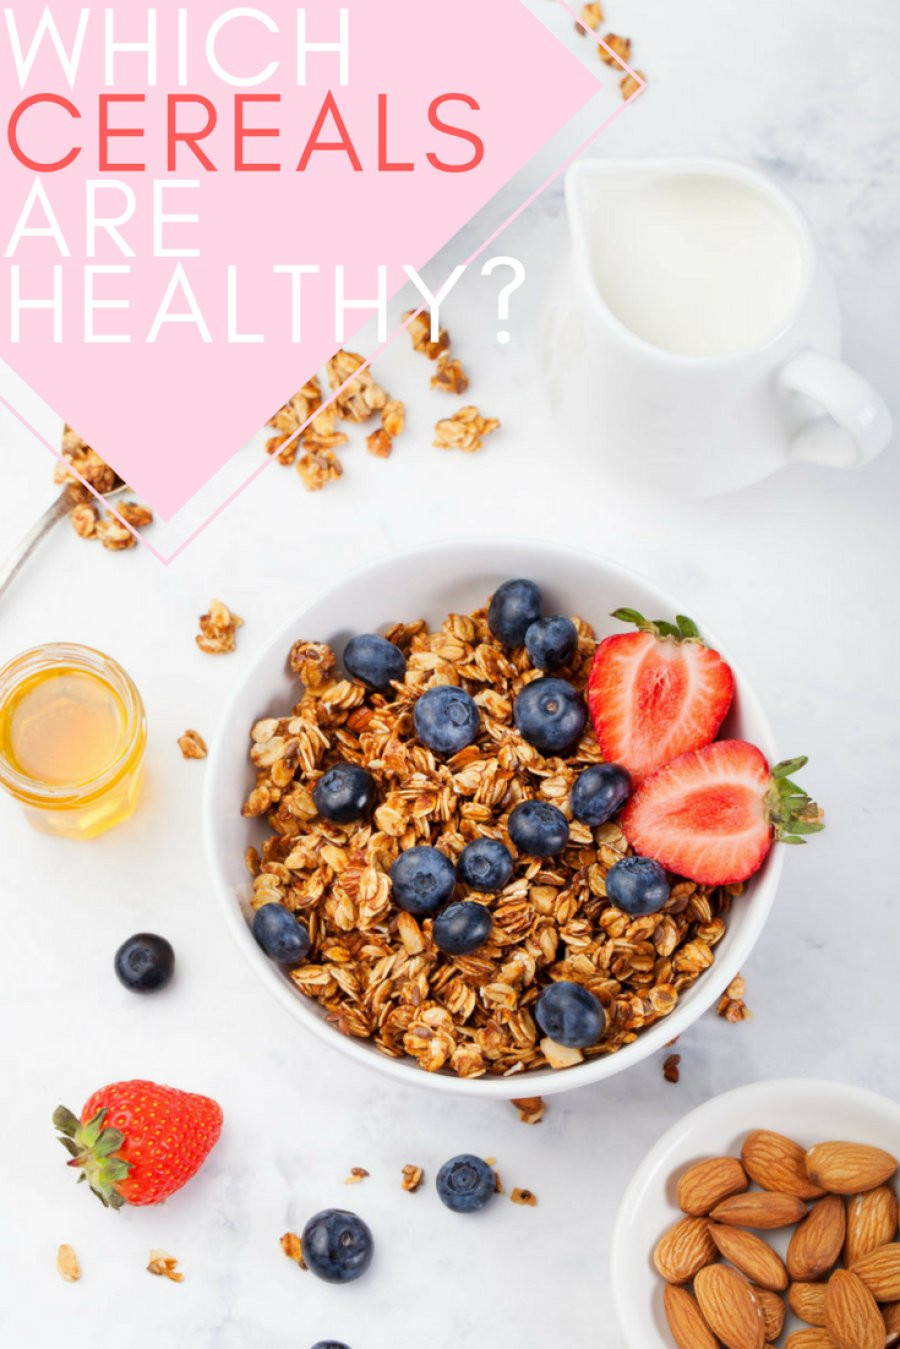 Healthiest Breakfast Cereals
 Here Are The Breakfast Cereals That Are Actually Healthy